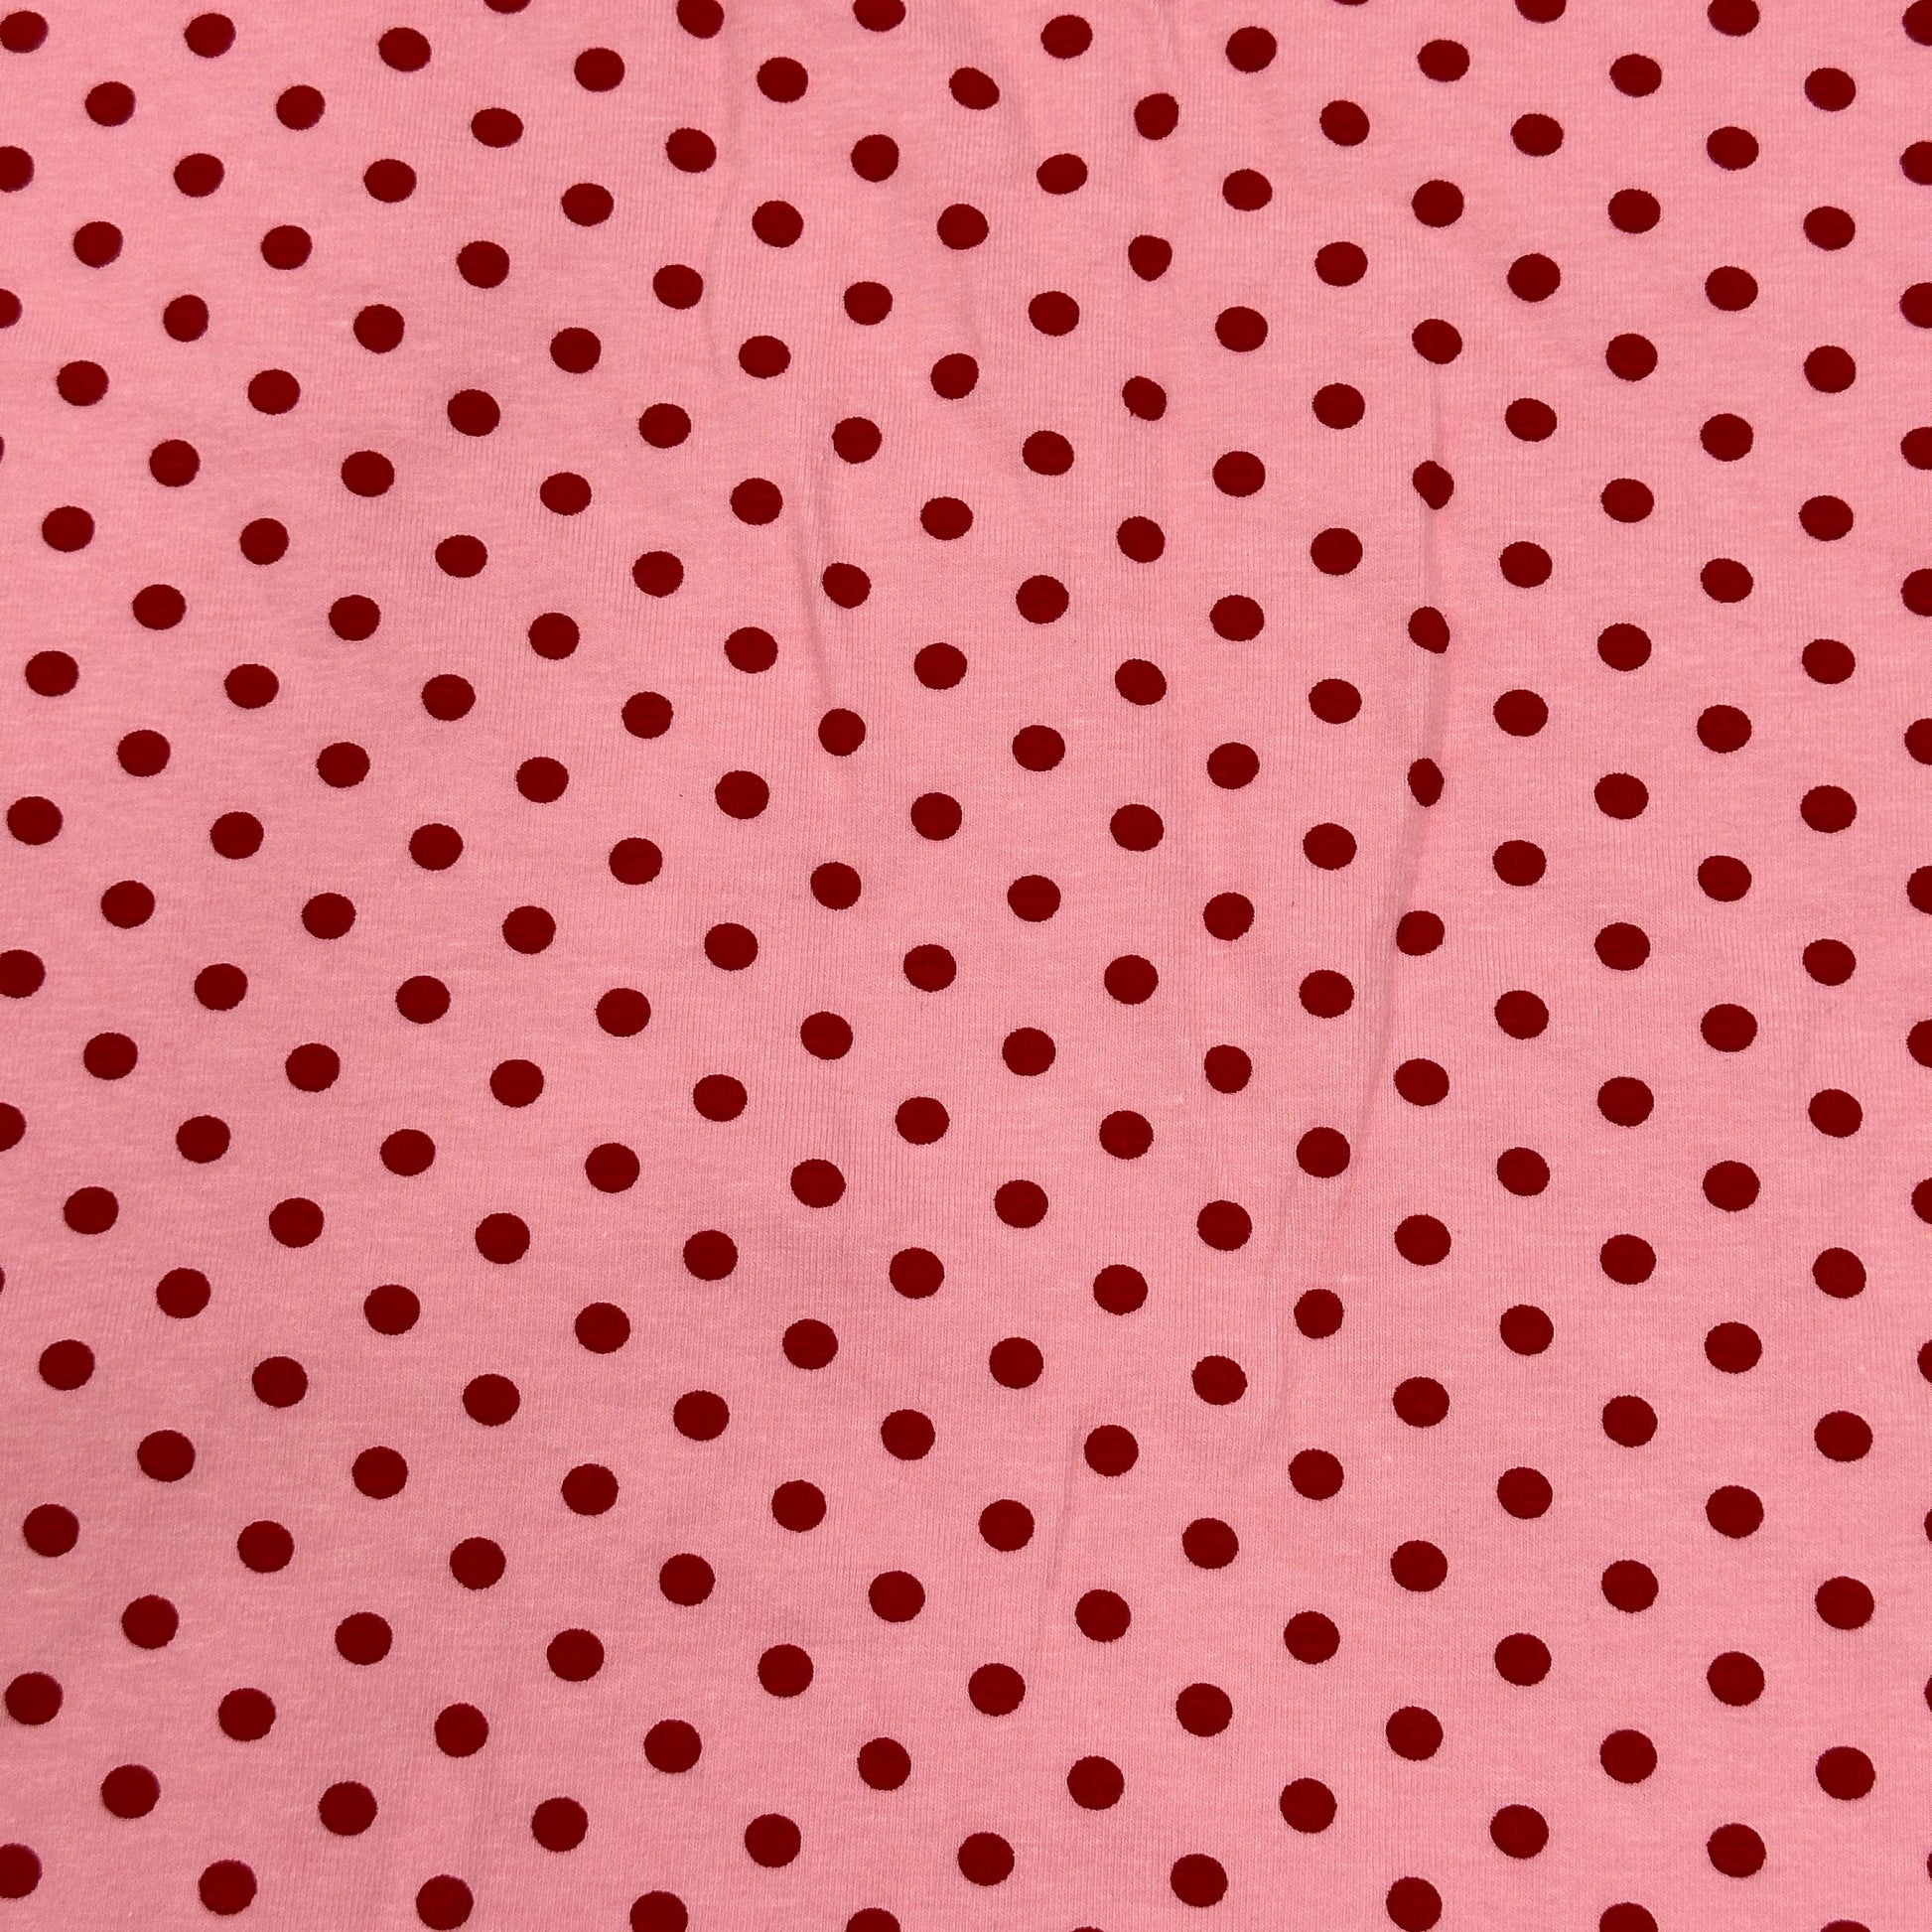 Red Dots on Pink Cotton/Spandex Jersey Fabric - Nature's Fabrics